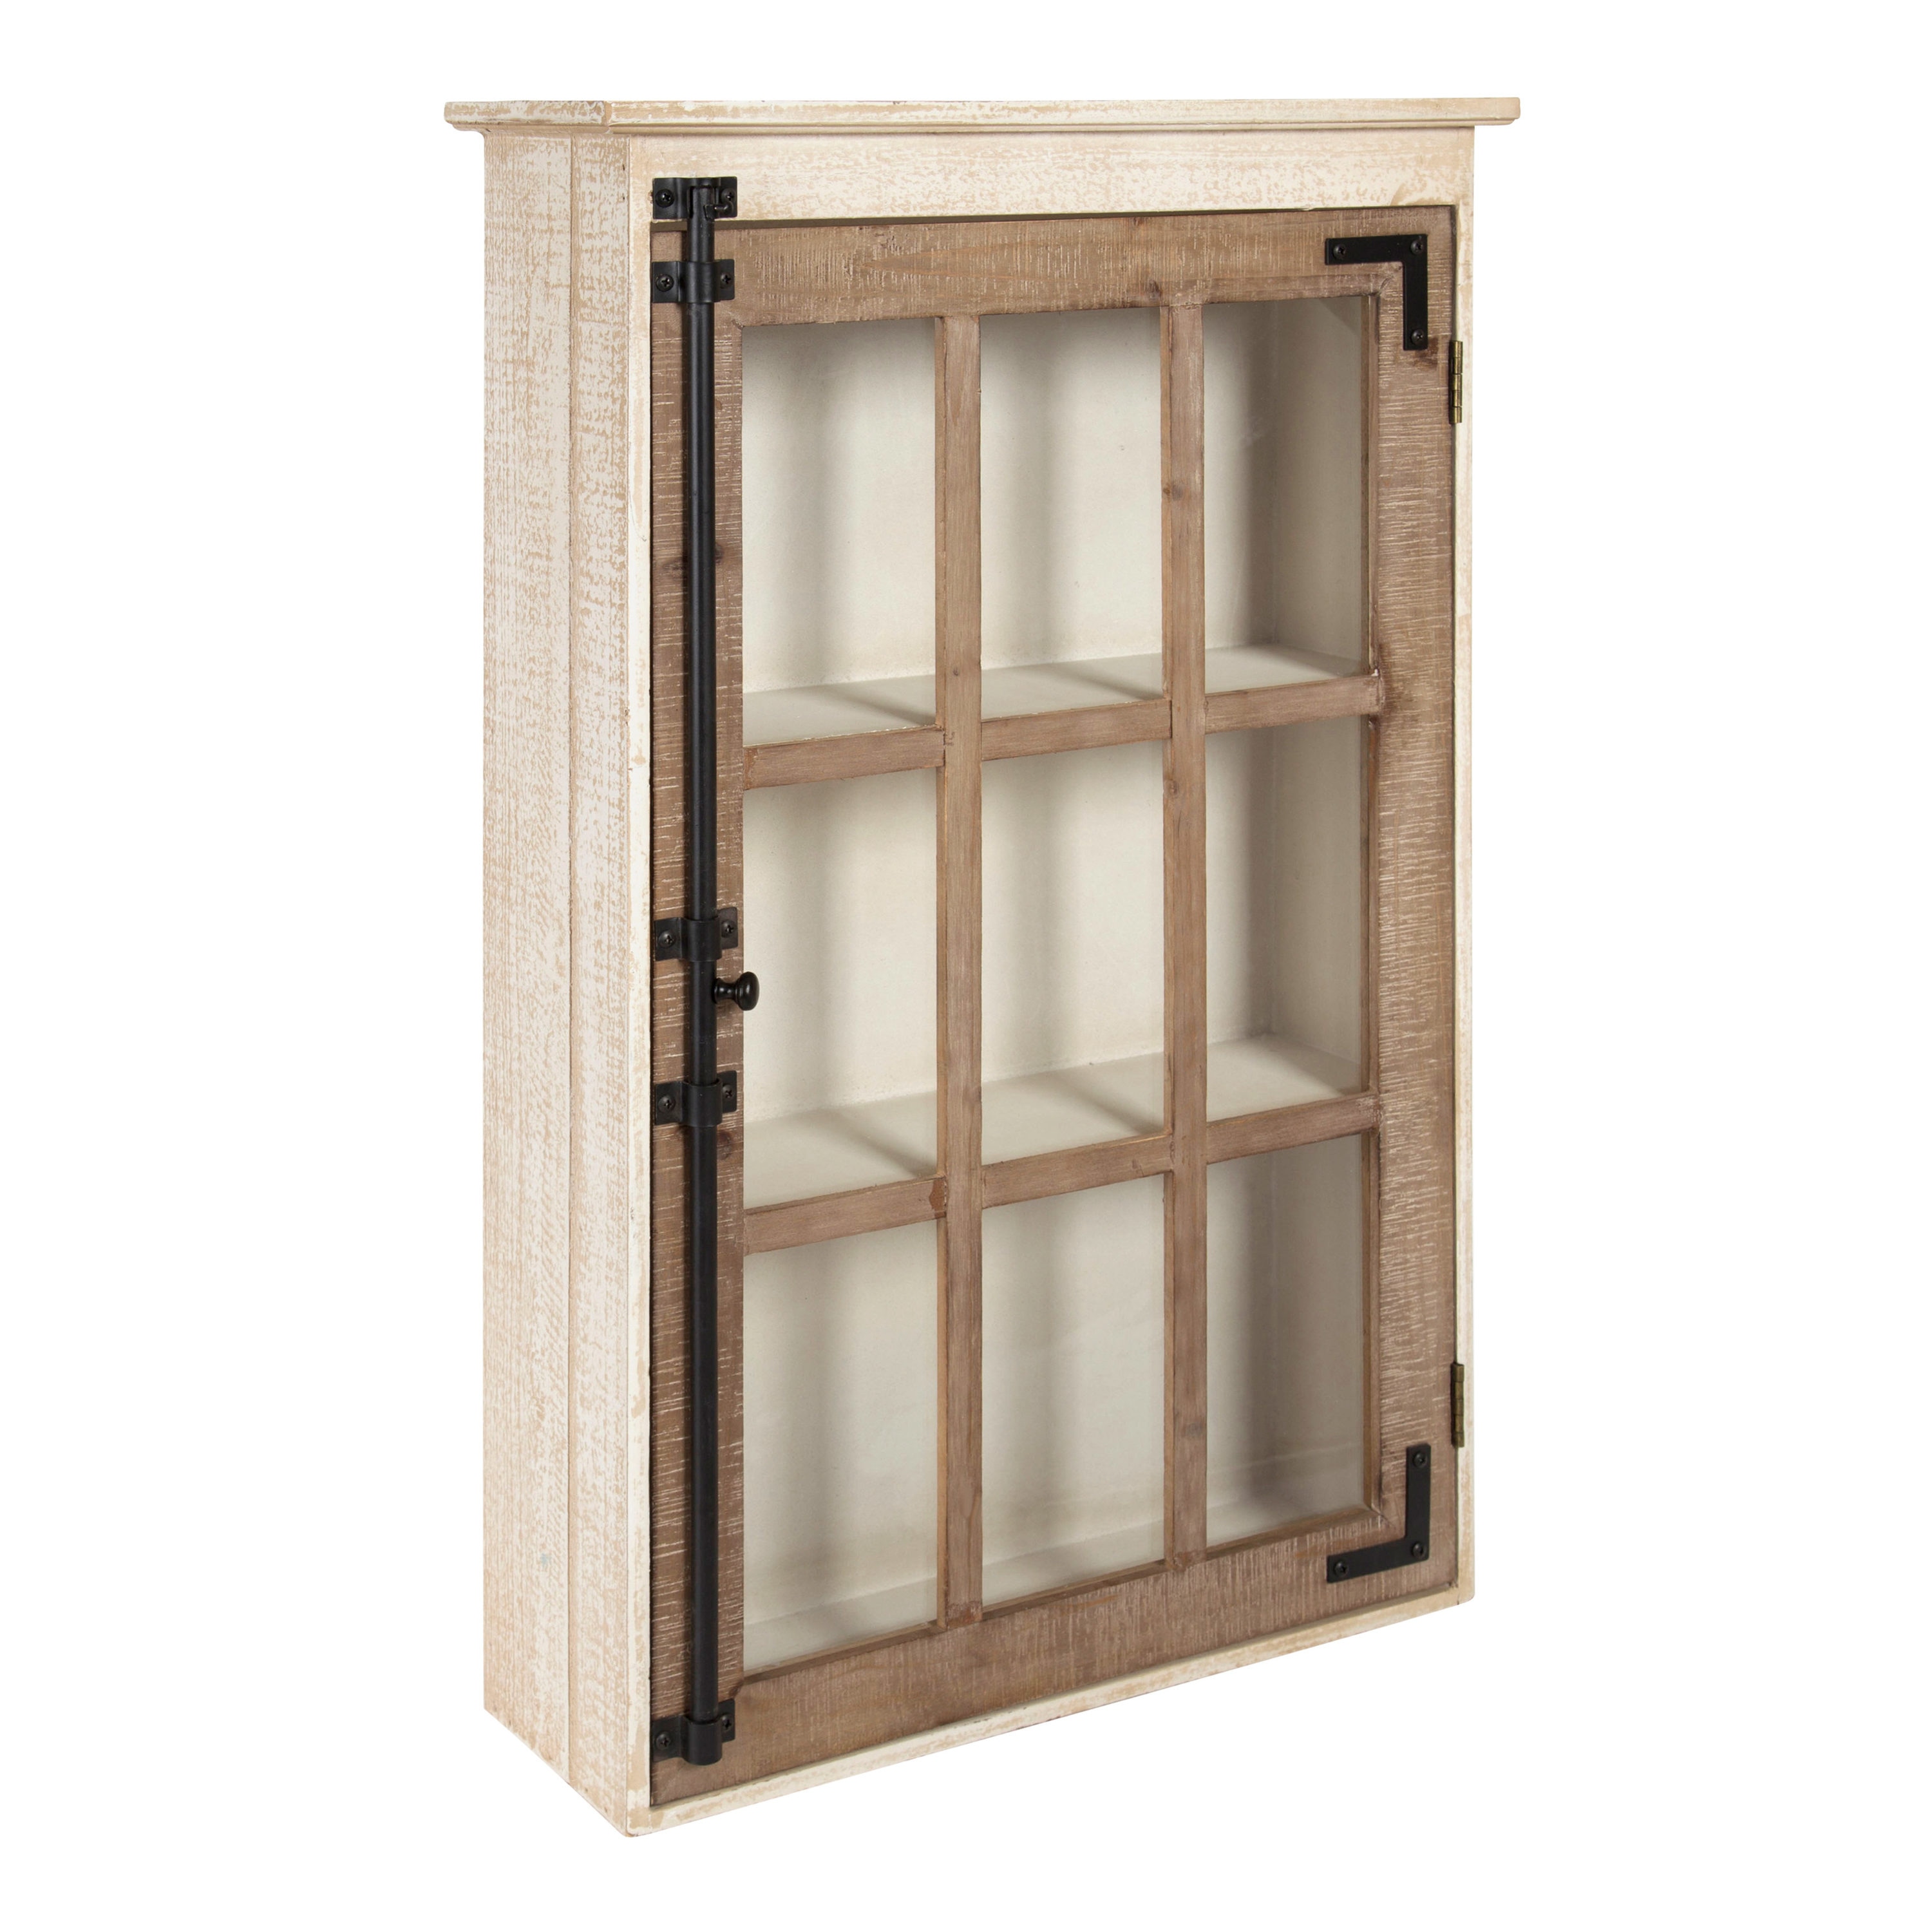 Kate And Laurel Hutchins Decorative Farmhouse Wood Wall Storage Cabinet With Window Pane Glass Door Rustic White Brown